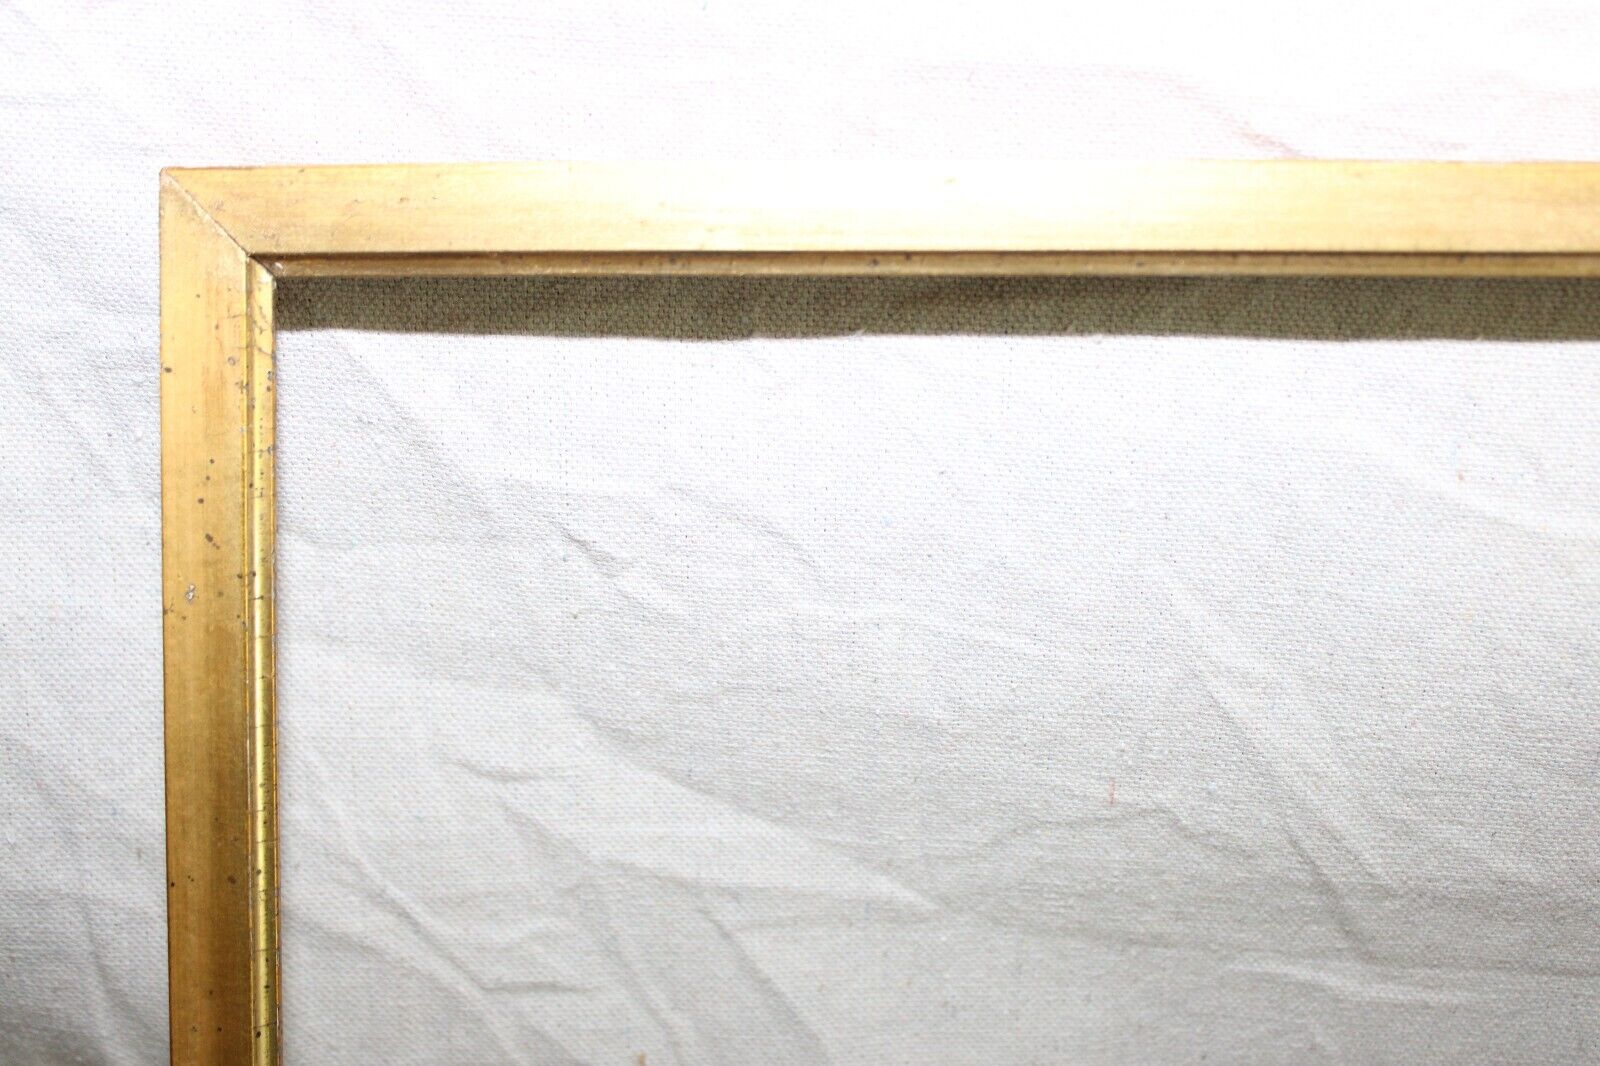 ANTIQUE FITS 8 X 10 GOLD GILT PICTURE FRAME WOOD FINE ART 1920 MAP DOCUMENT THIN